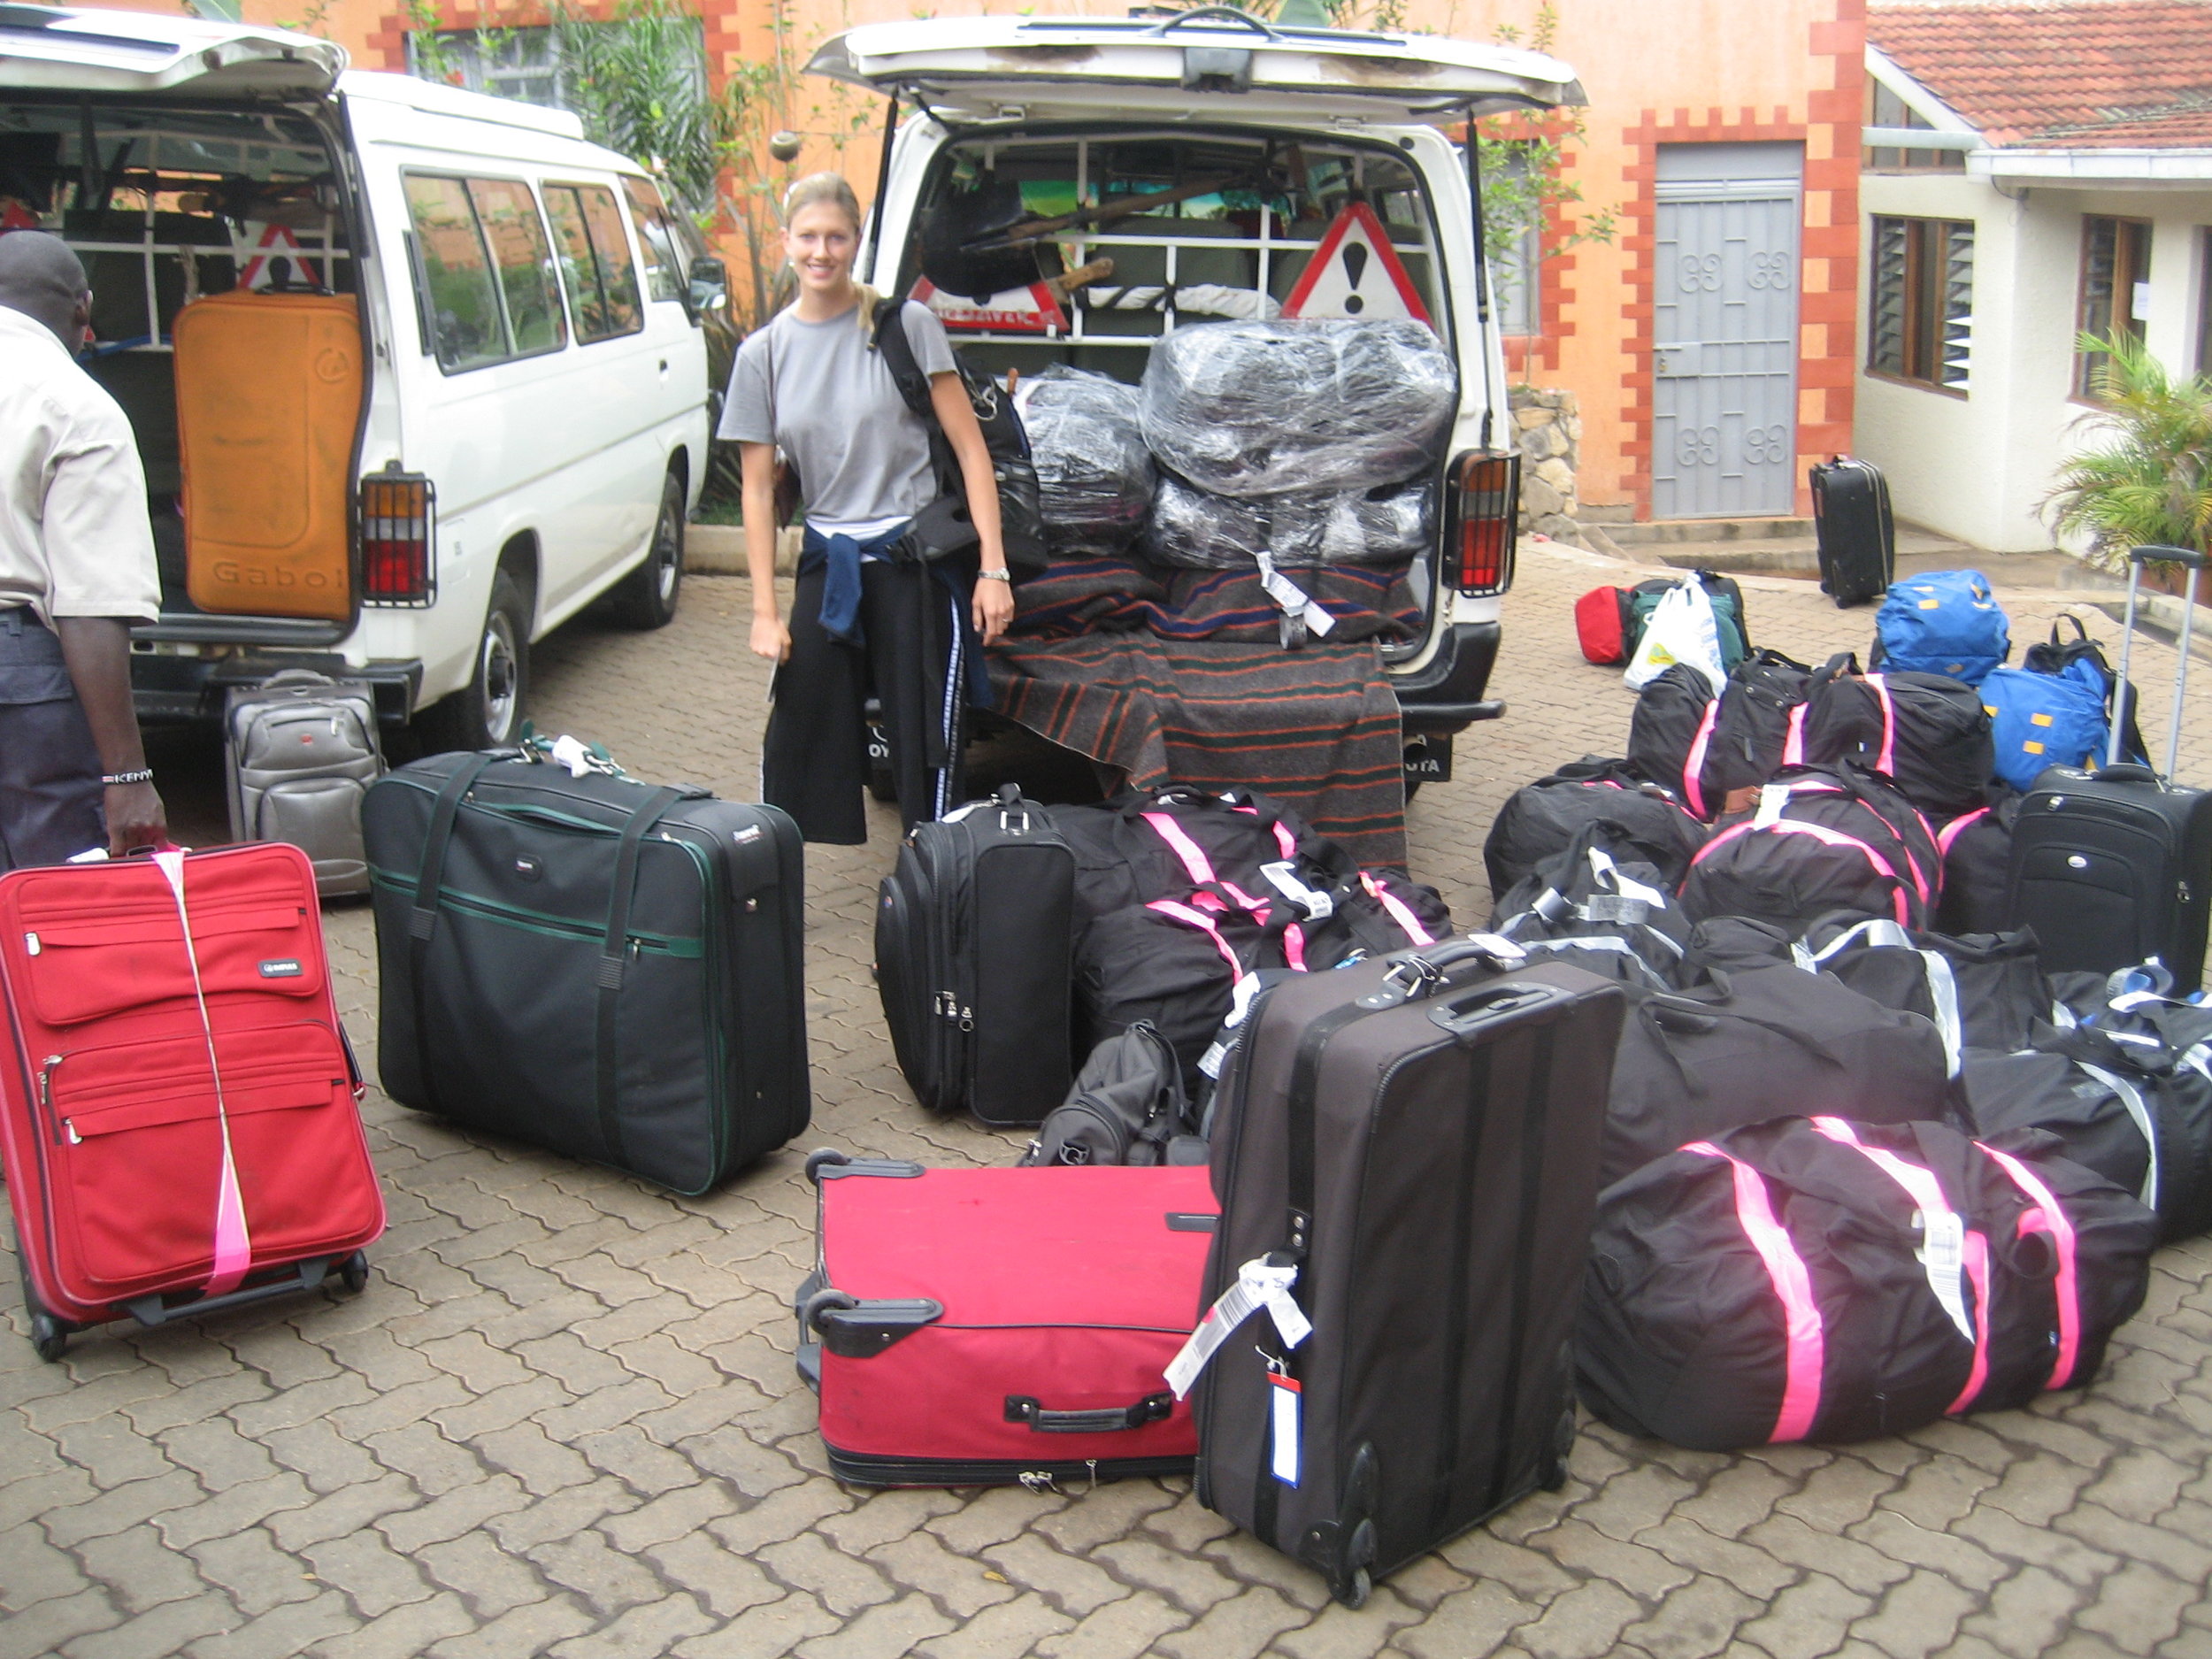  Geneva and all of the bags of gloves and medicines brought to Kenya. 